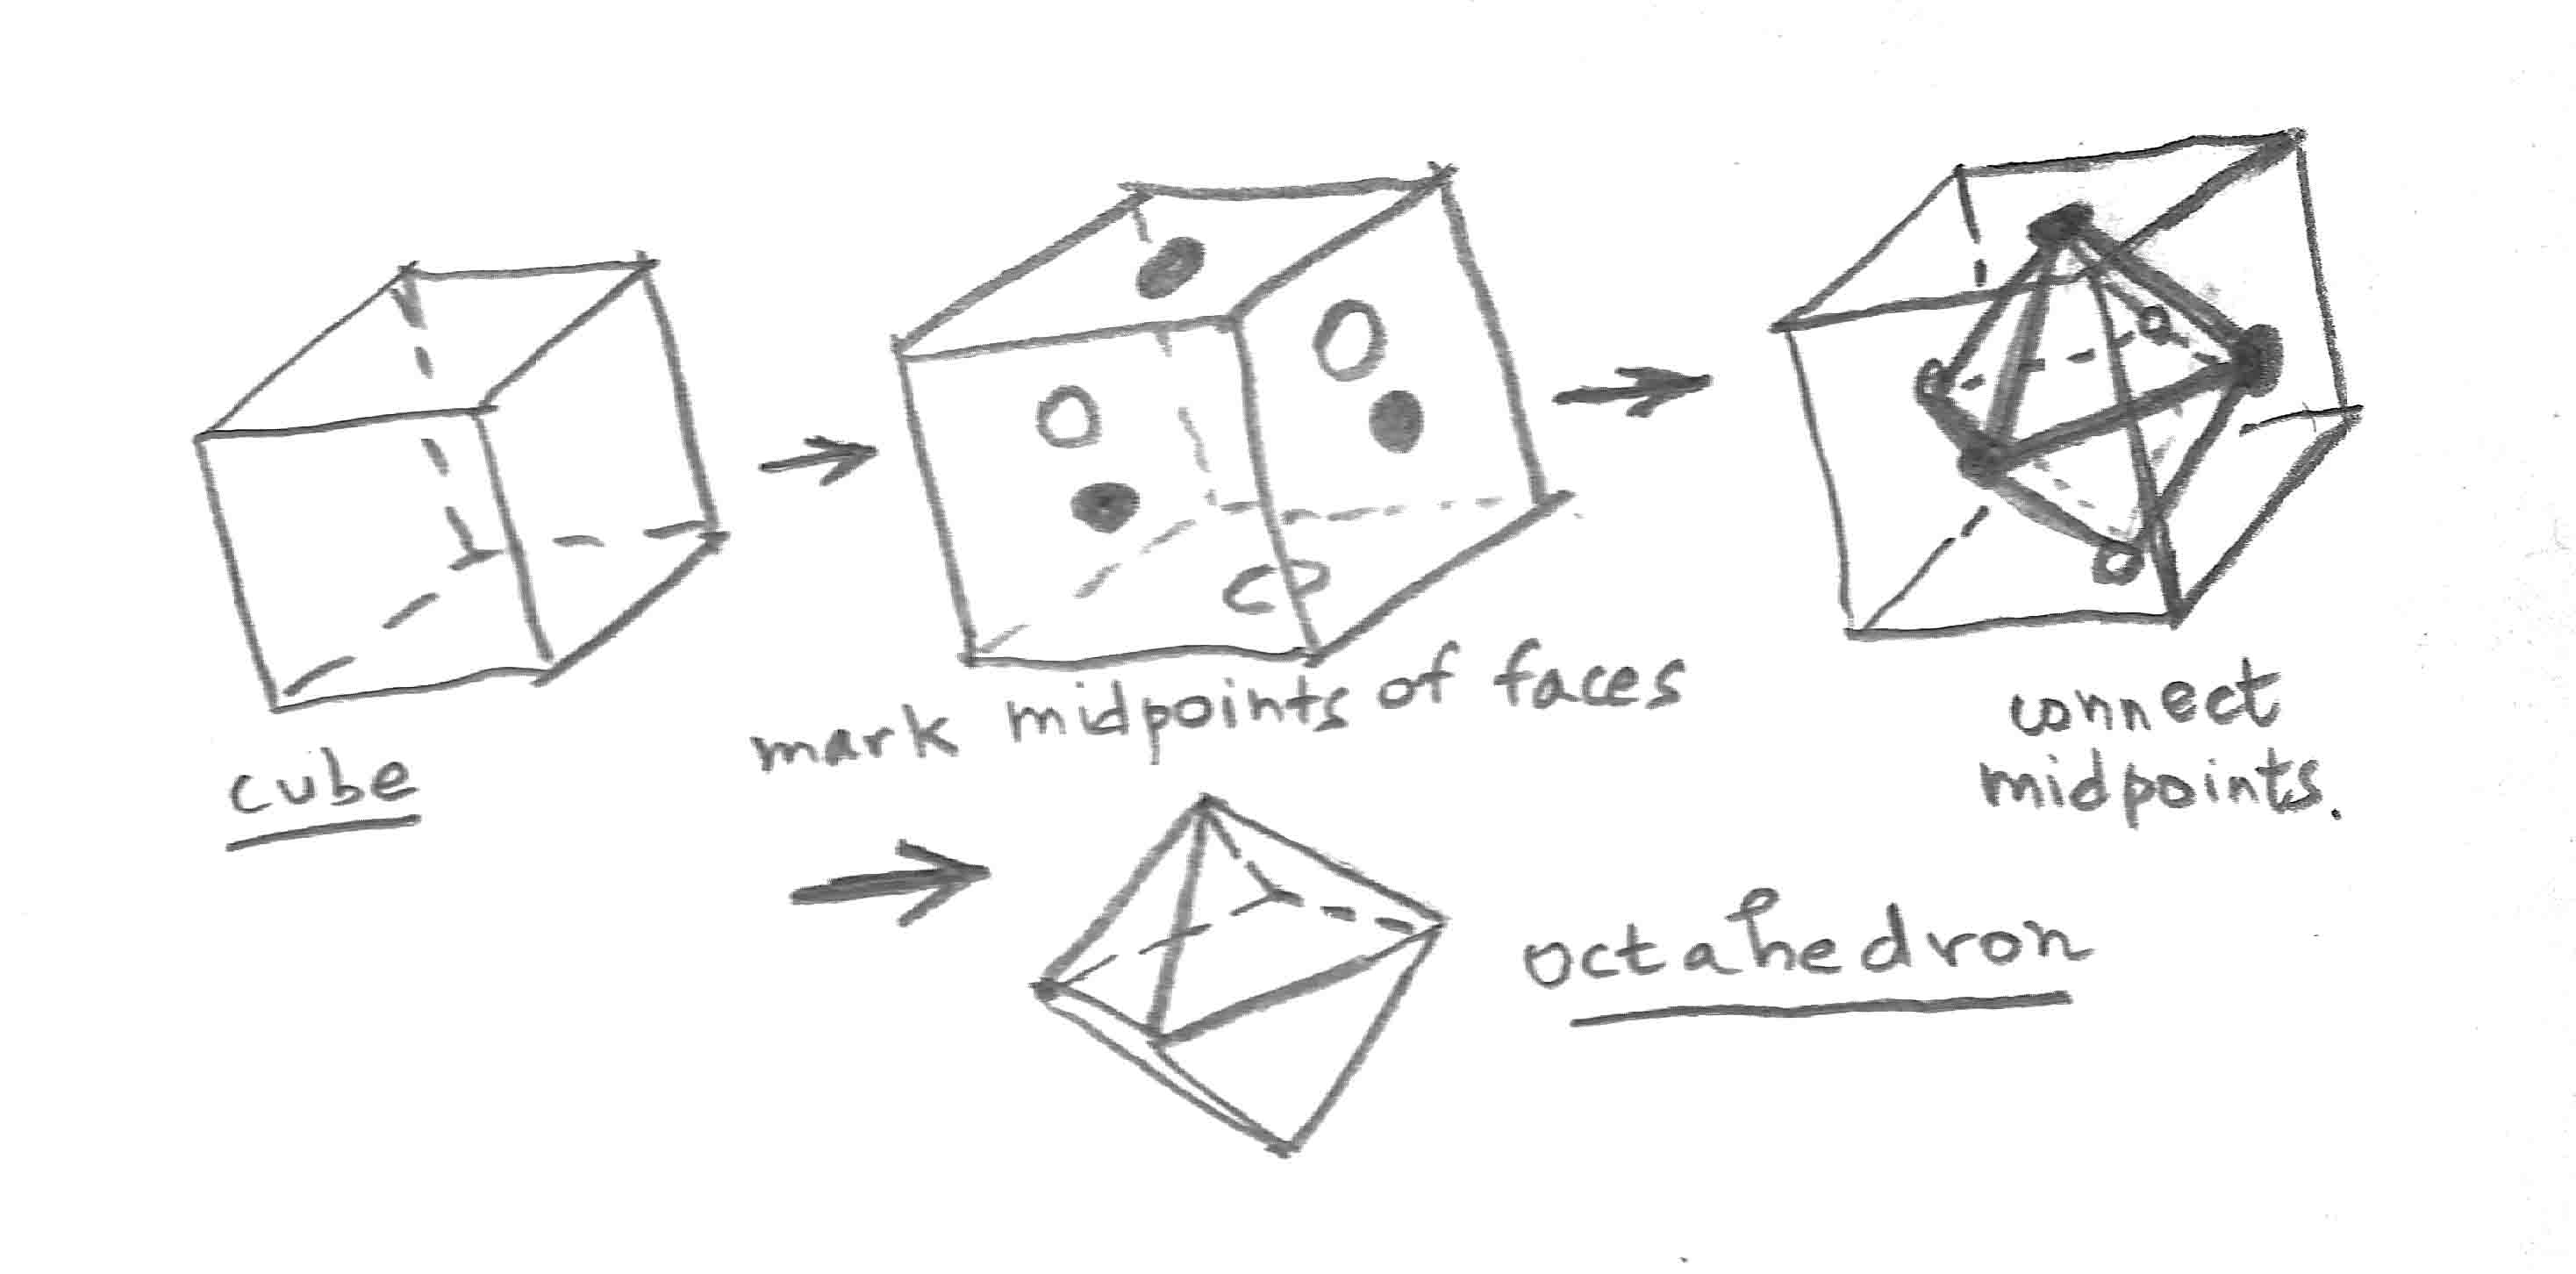 cube contains octahedron